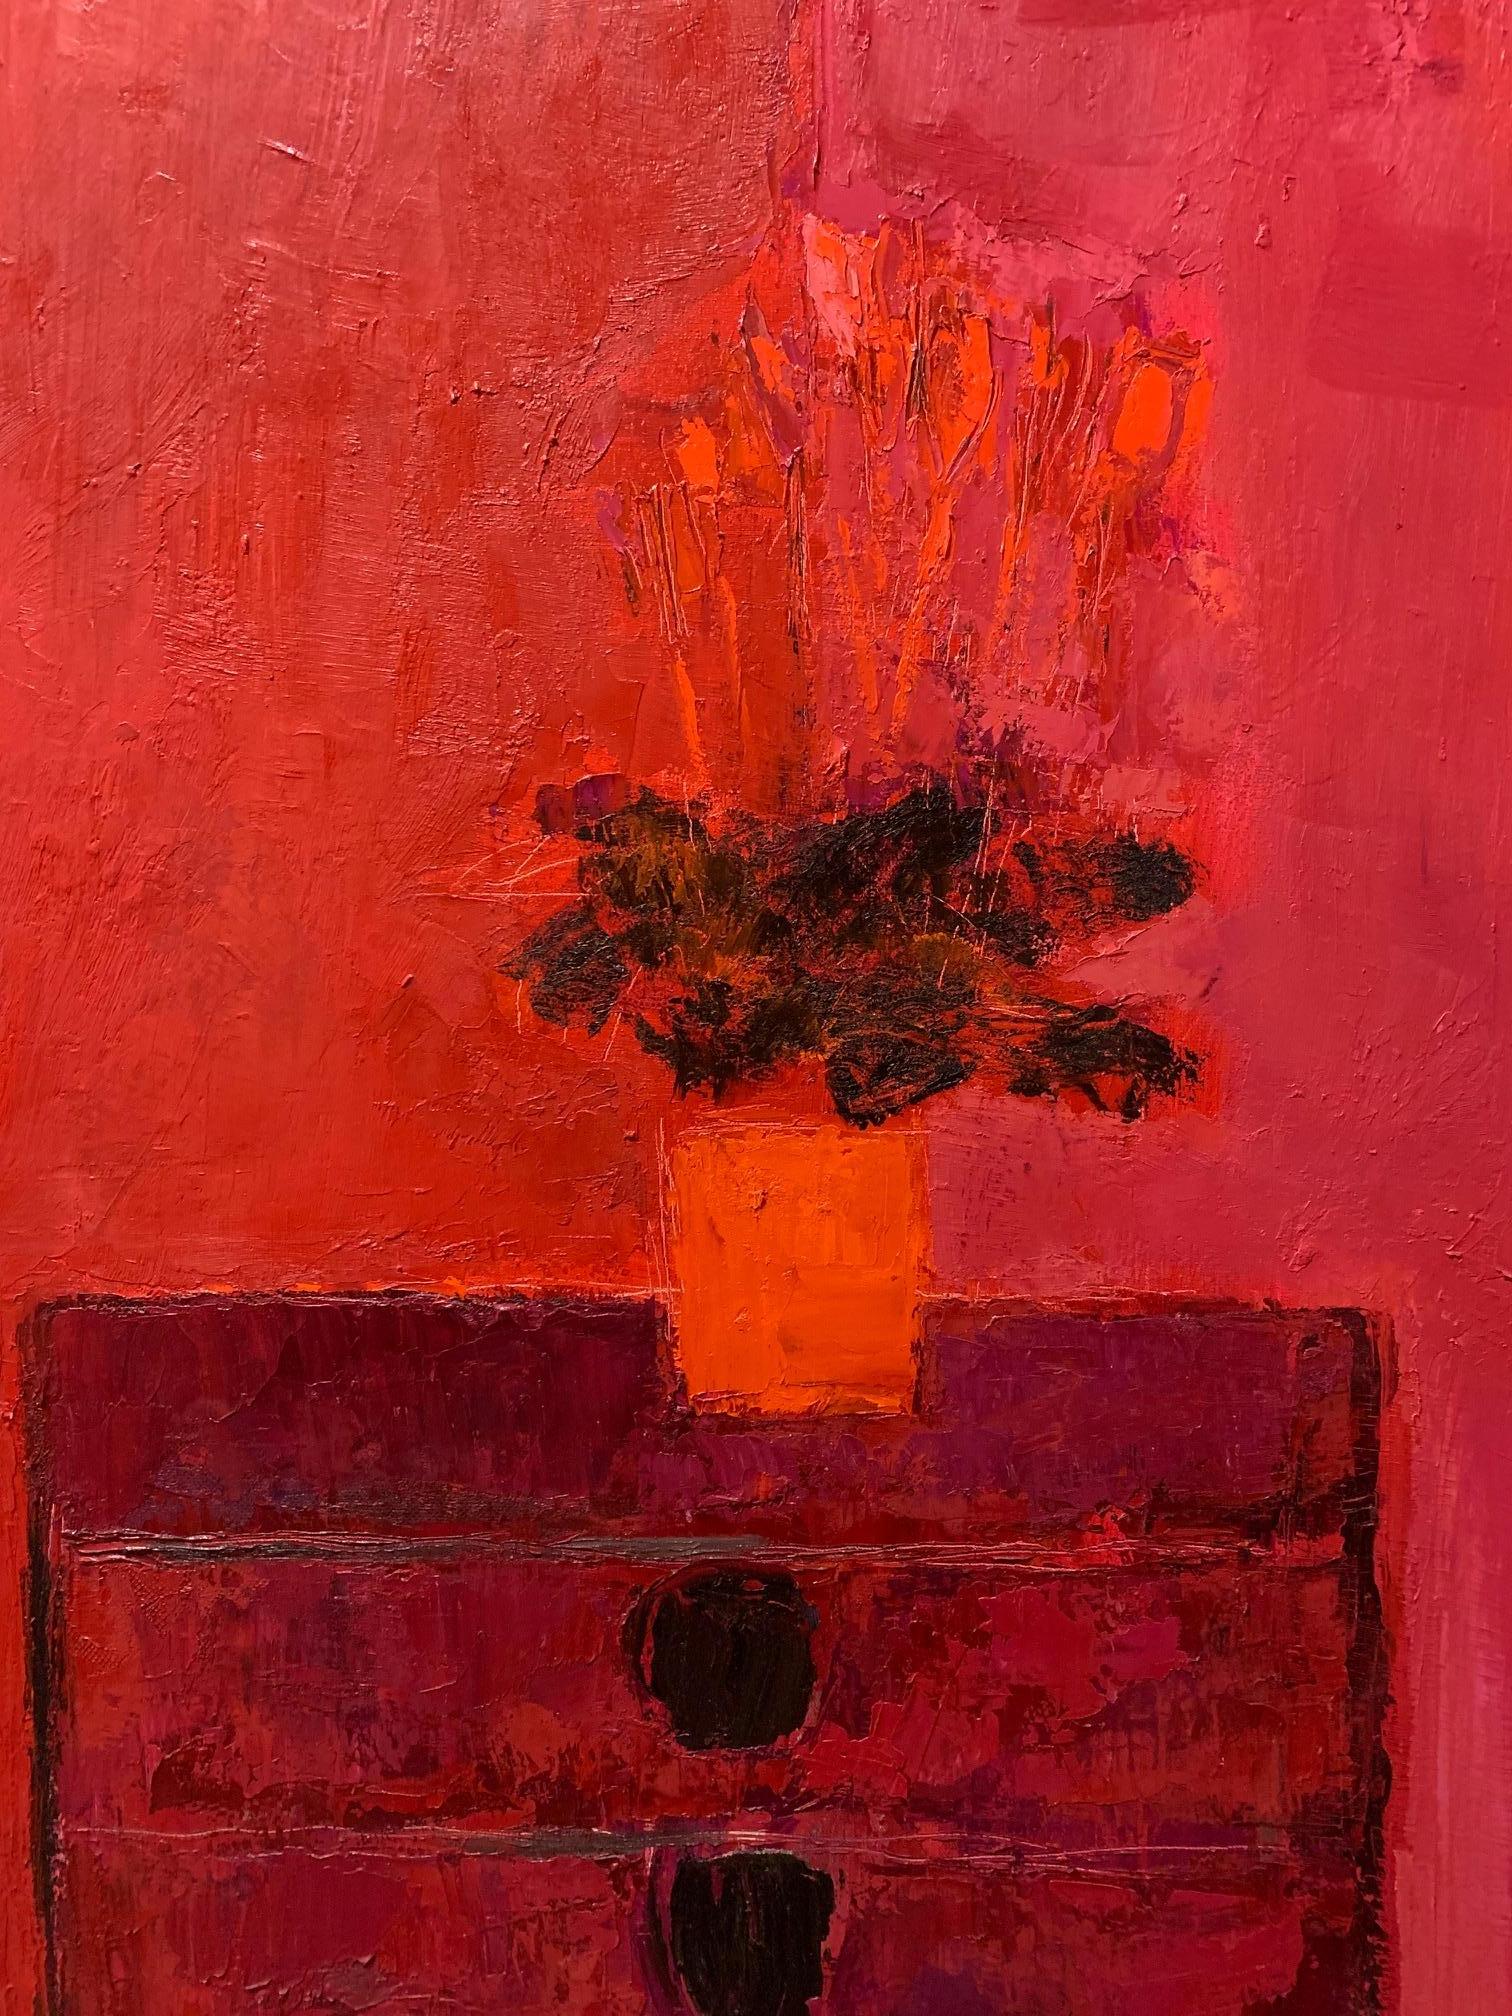 This modern, minimal, still life artwork depicts a small floral vases sitting on a shelving using pink and red colours to create a contrast within the work. 

Bernard Cathelin (1919-2004) was born in Paris and used his art to describe the love for